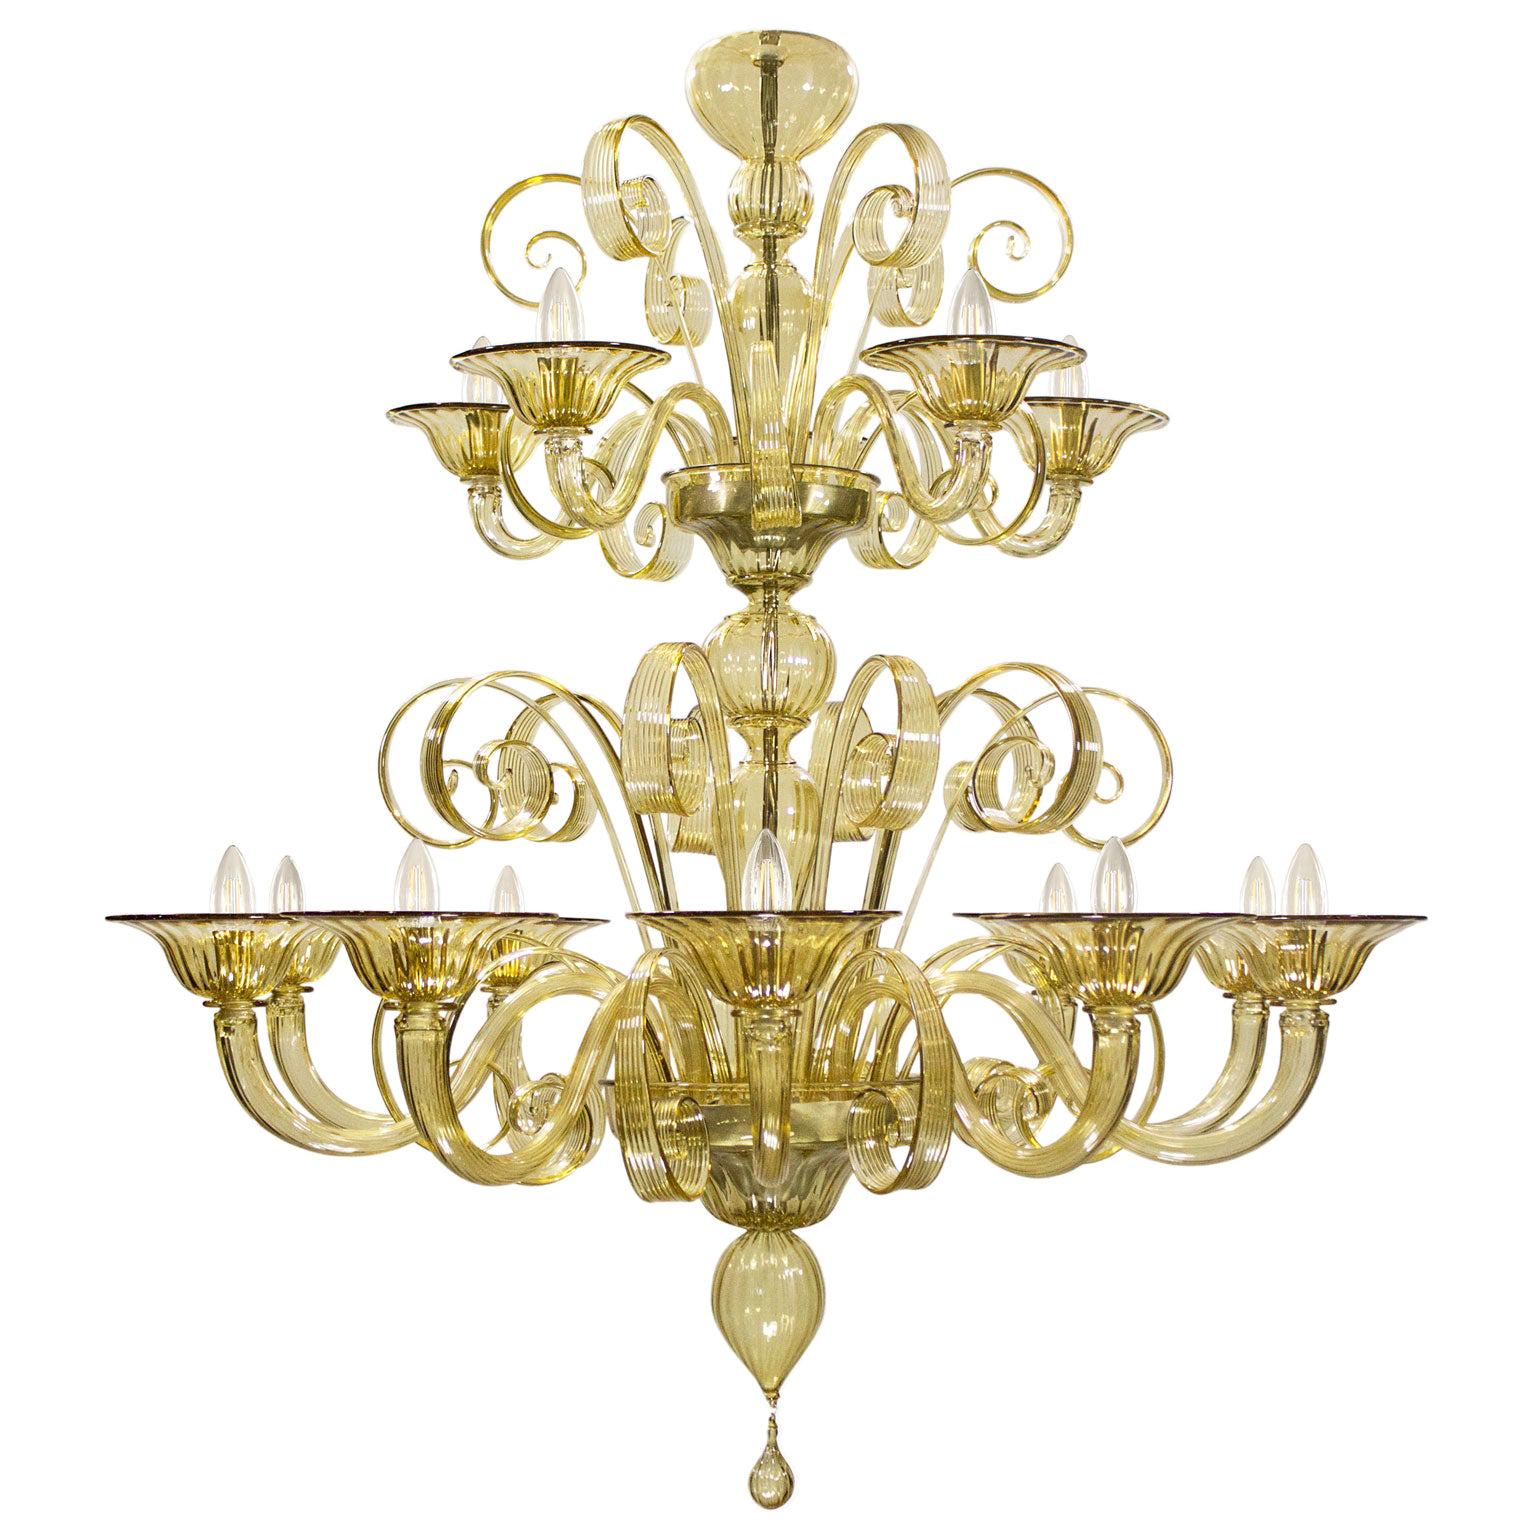 Venetian style Chandelier 15arms 2 tiers Smoky Quartz Murano Glass by Multiforme For Sale